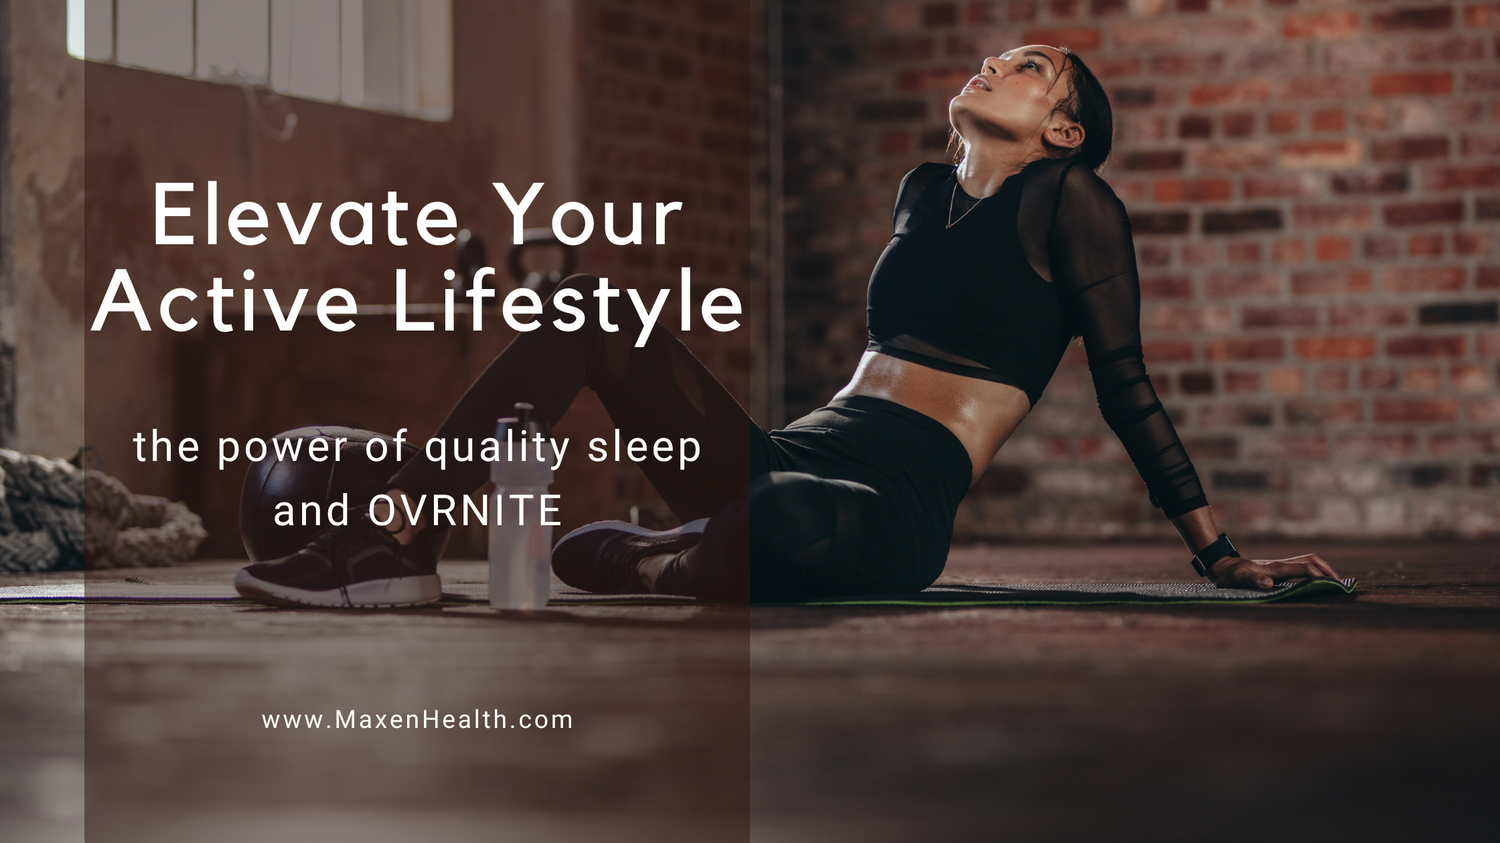 Elevate Your Active Lifestyle: The Power of Quality Sleep and OVRNITE - Maxen Health